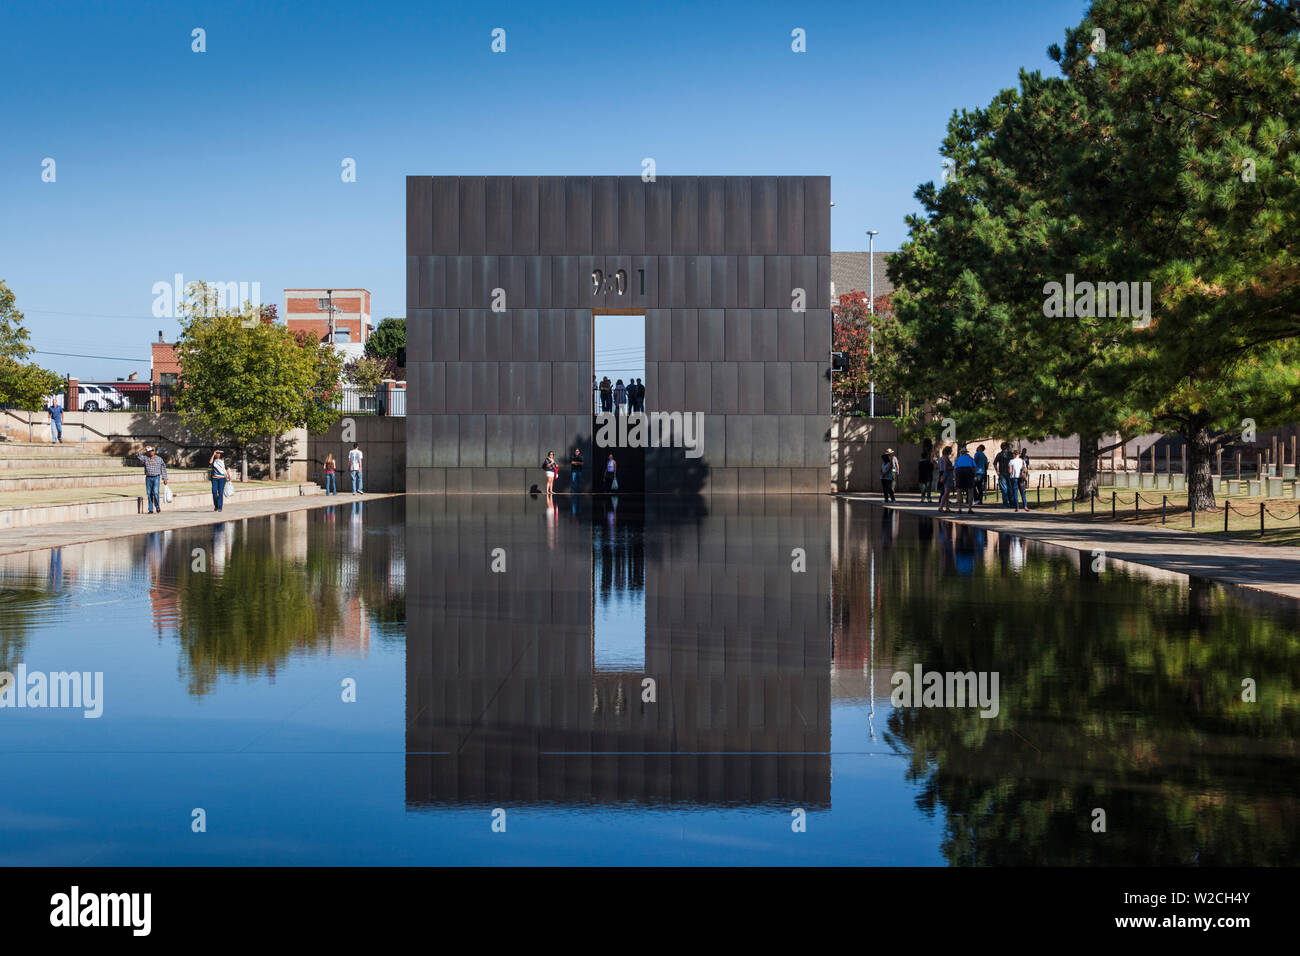 USA, Oklahoma, Oklahoma City, Oklahoma City National Memorial to the victims of the Alfred P. Murrah Federal Building Bombing on April 19, 1995, East Entrance Stock Photo